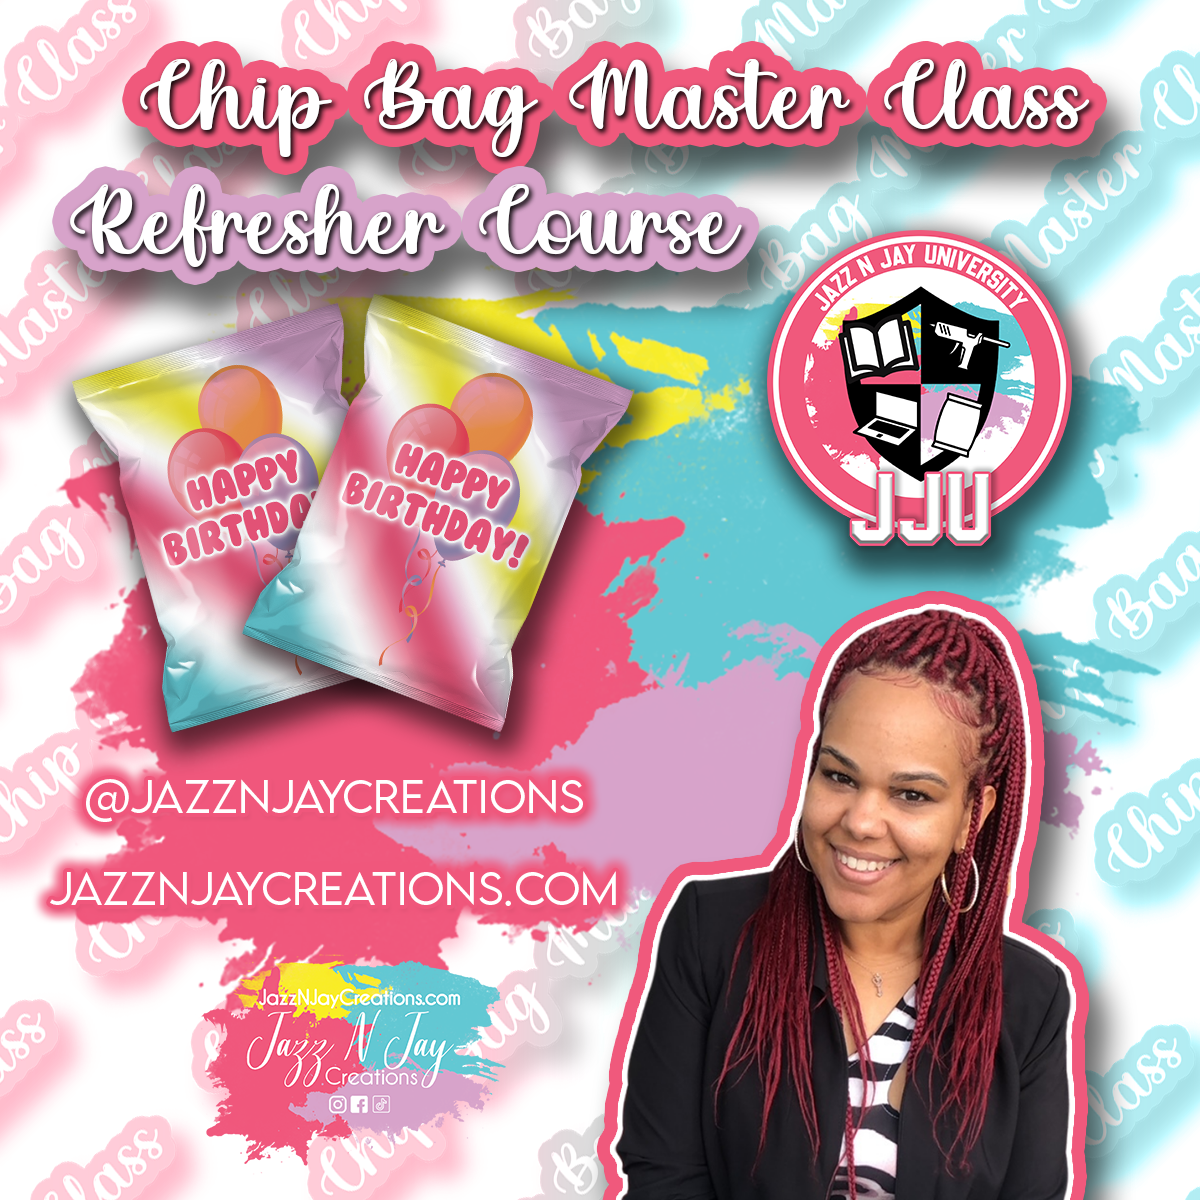 REFRESHER COURSE Chip Bag Master Class JAZZ N JAY UNIVERSITY – Jazz N Jay  Creations